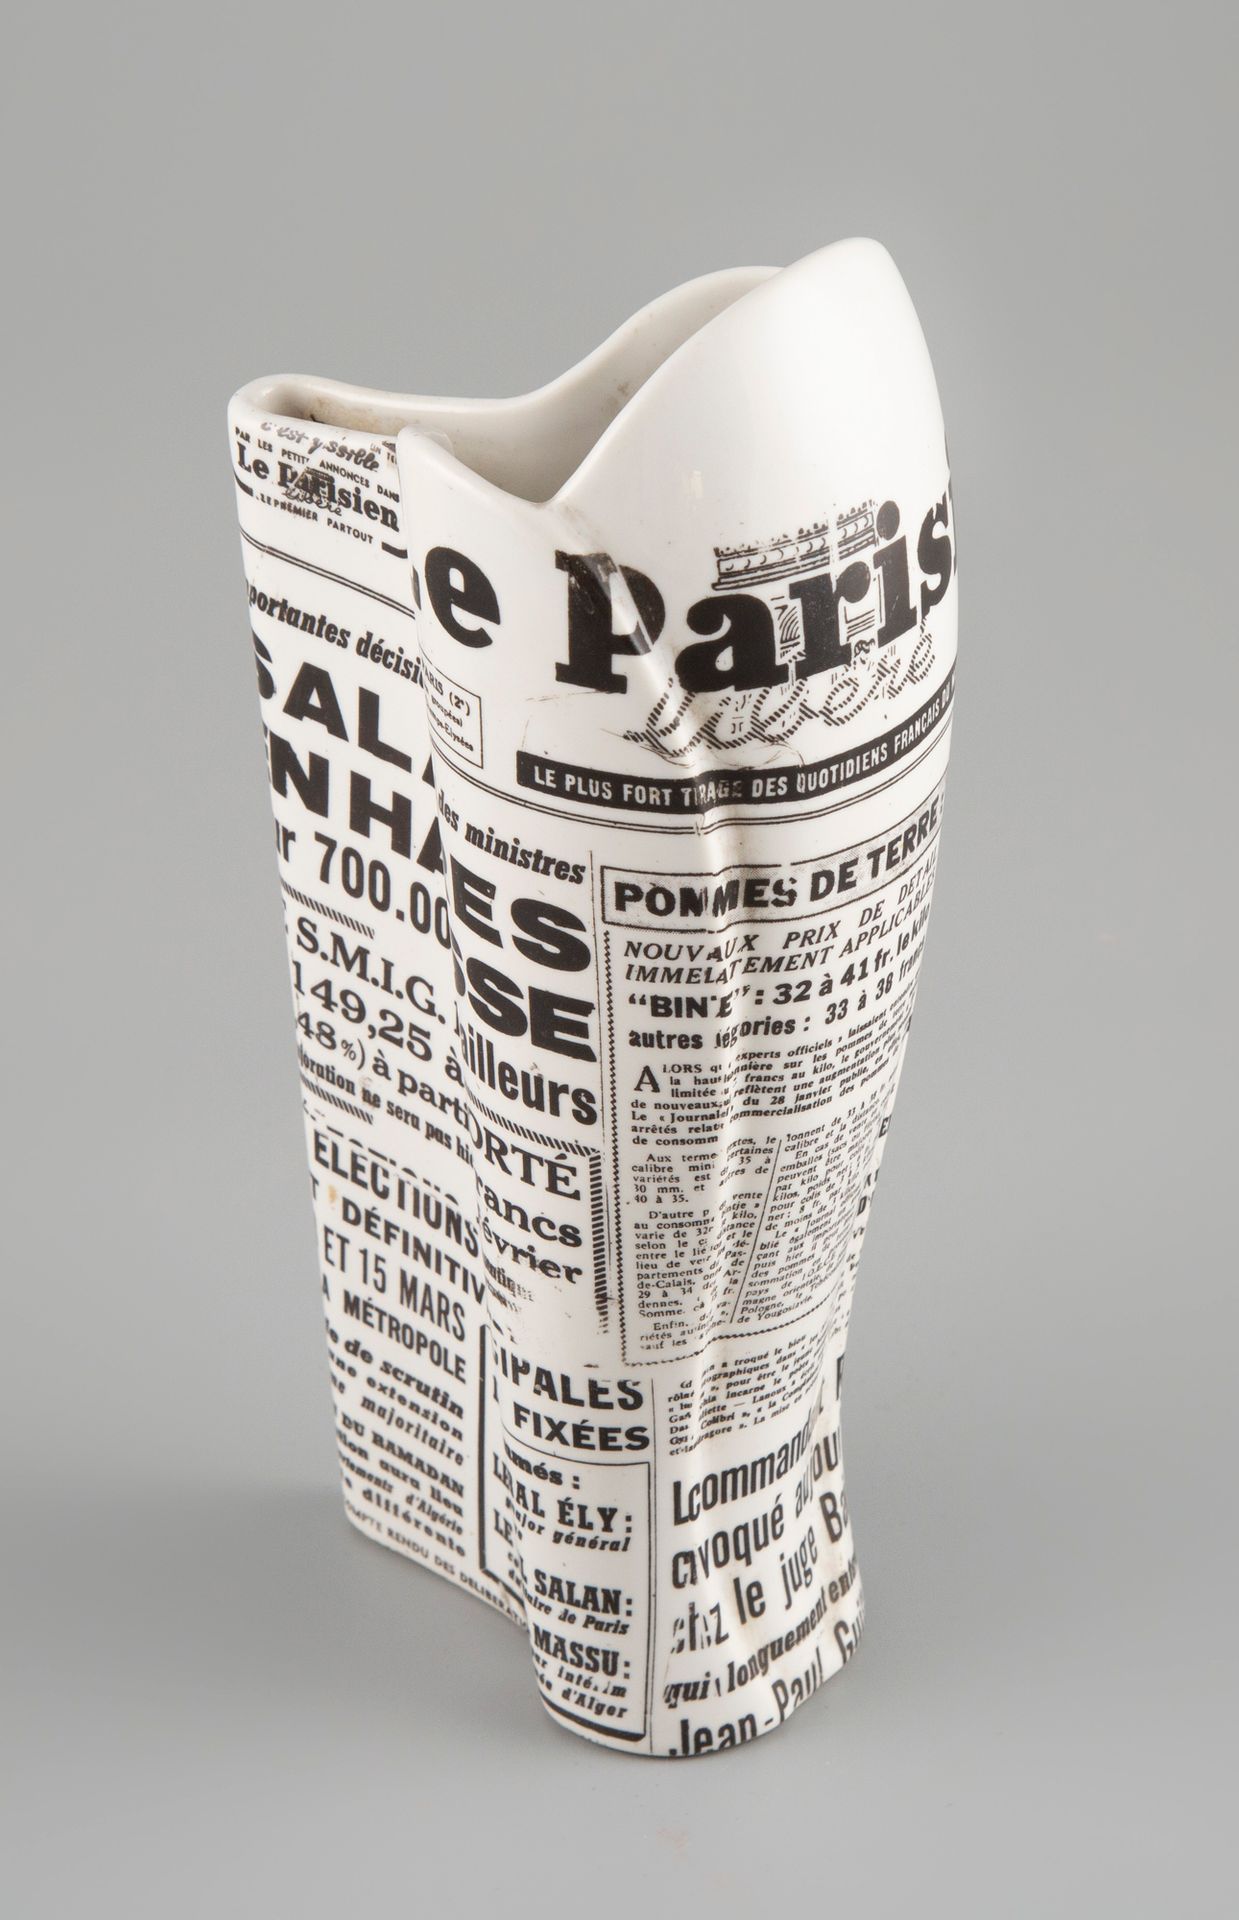 Null Vase formed from a rolled up newspaper, "Le Parisien Libéré", 1960s

Printe&hellip;